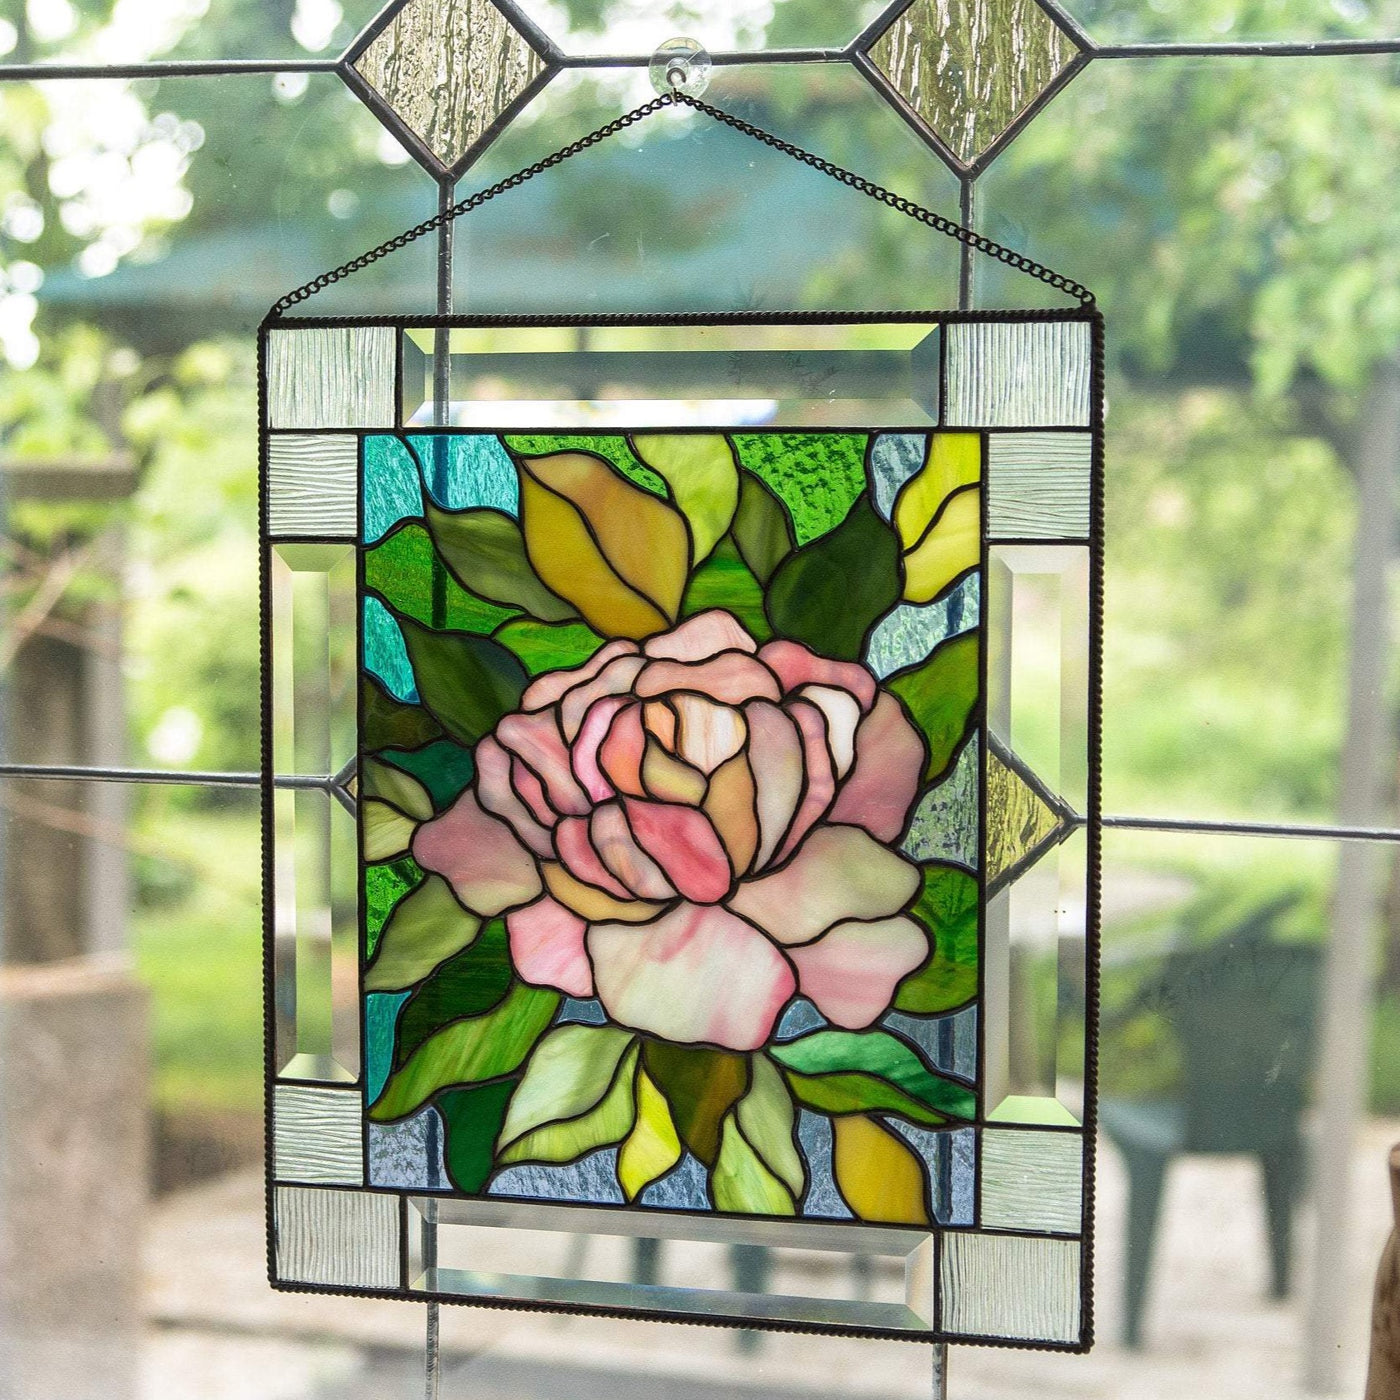 Stained glass pink peony with leaves on the background panel